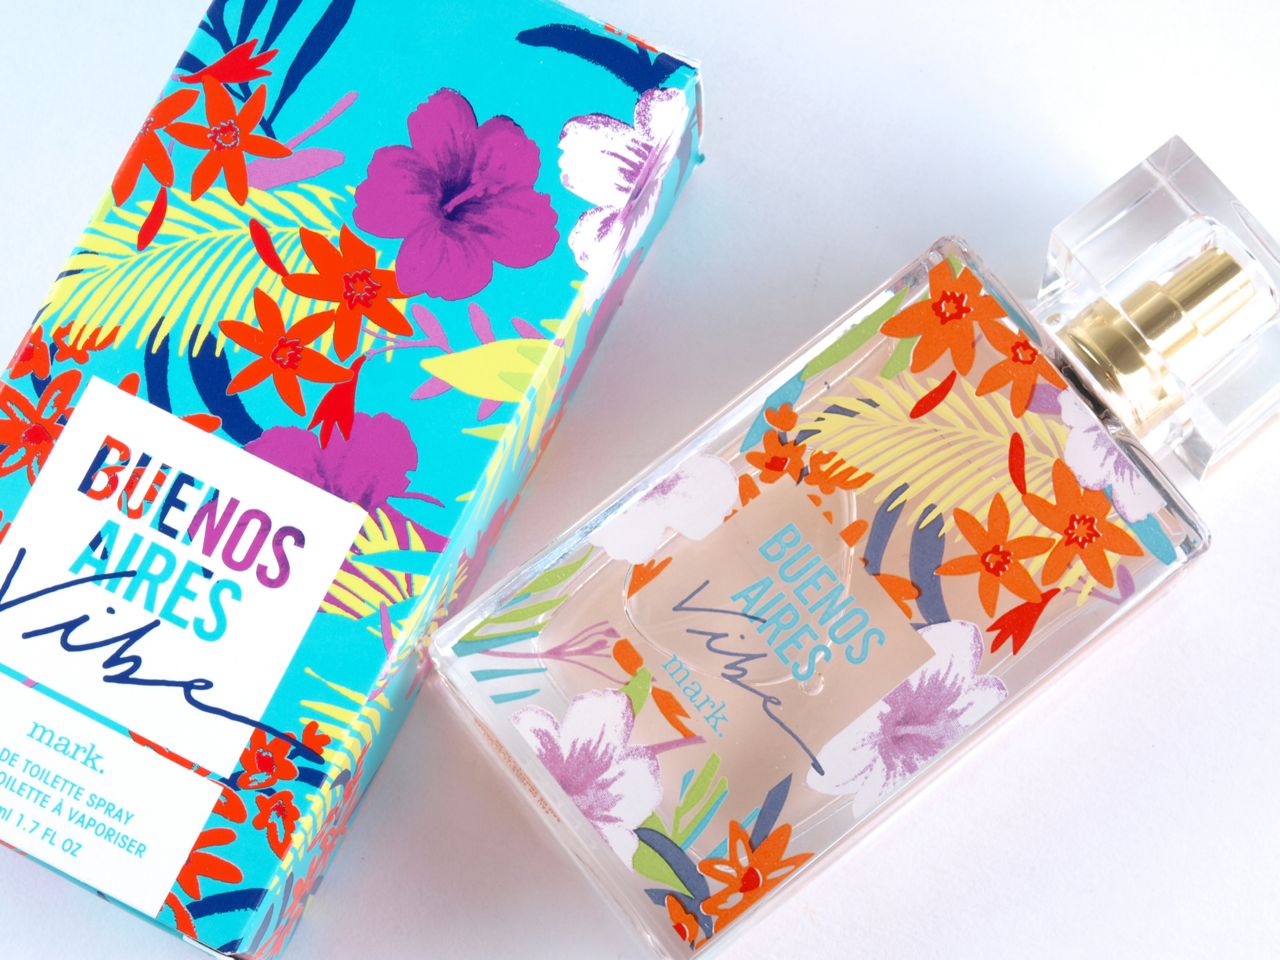 Mark. Buenos Aires Vibe Eau de Toilette & Nailed It Kit: Review and Swatches